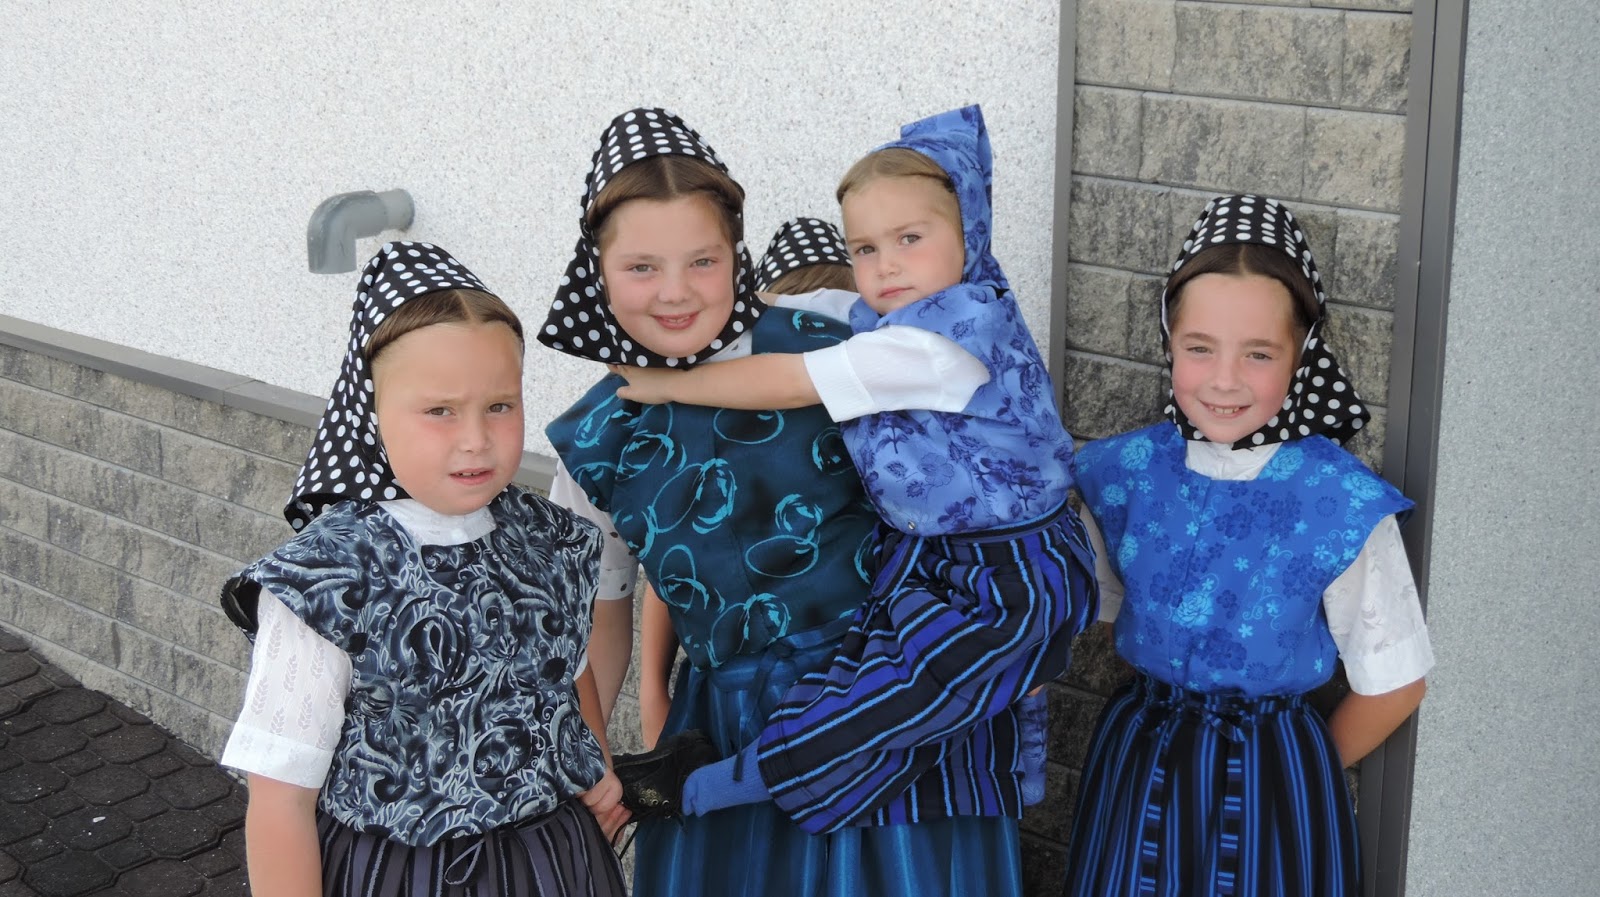 Travel with Kevin and Ruth!: A visit with the Hutterites